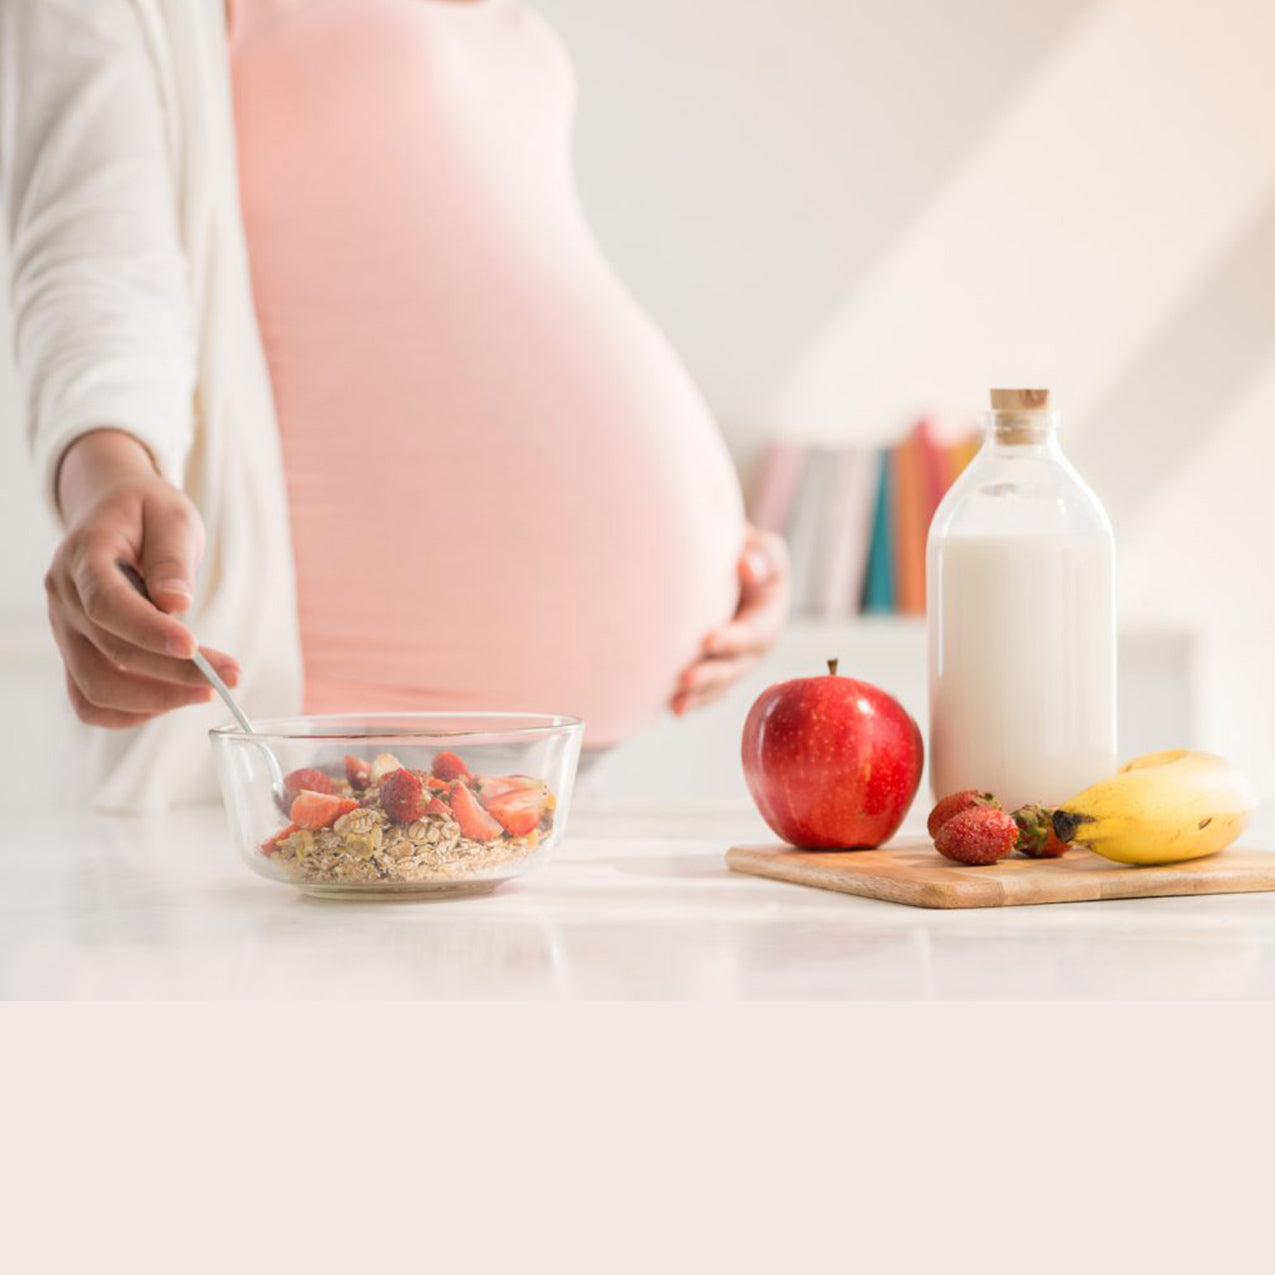 Pregnancy diet: the secret to an allergy free life